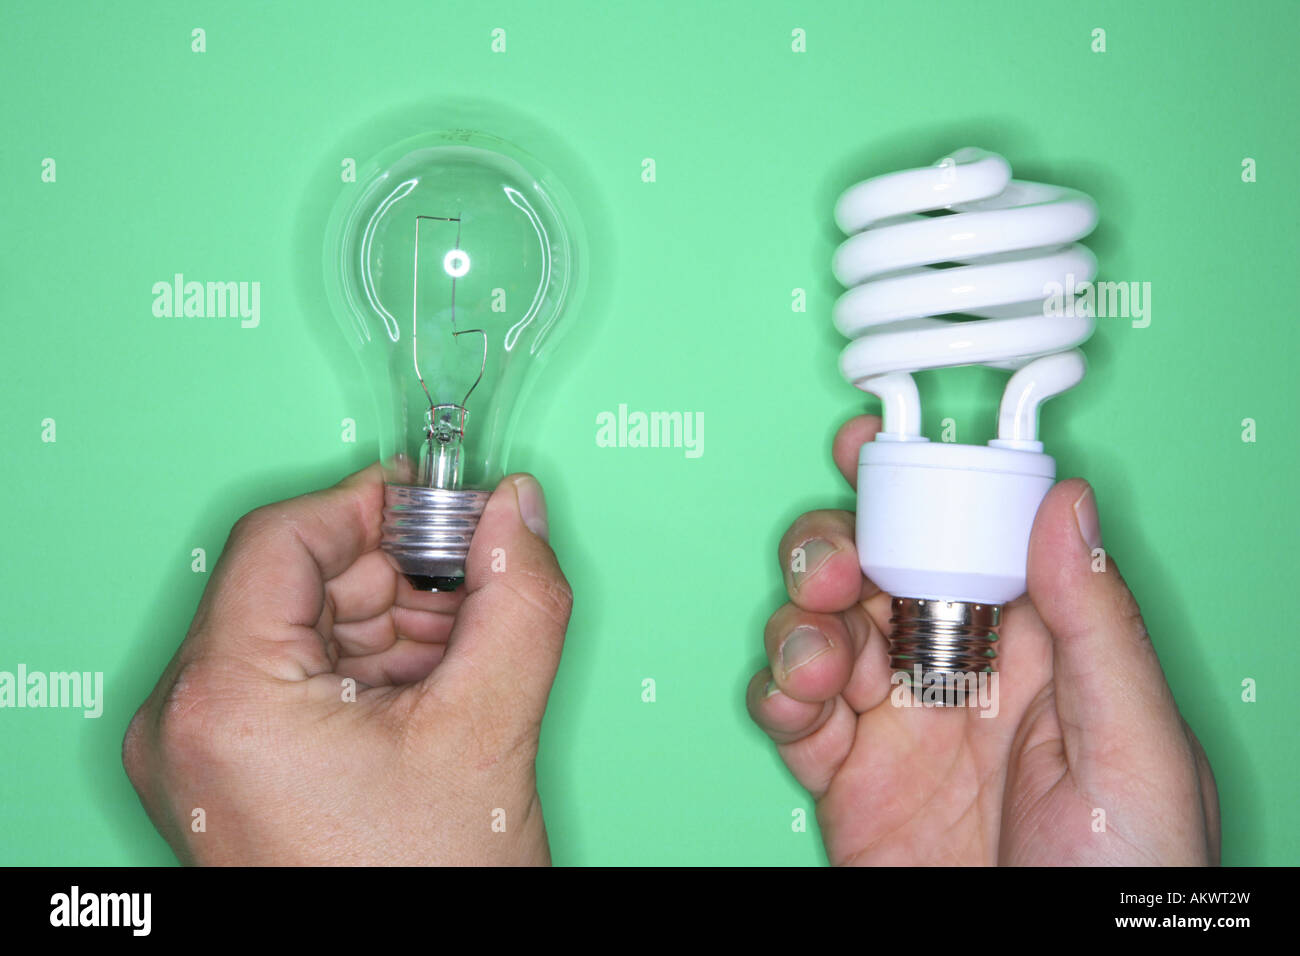 Hands holding traditional and energy efficient lightbulbs Stock Photo